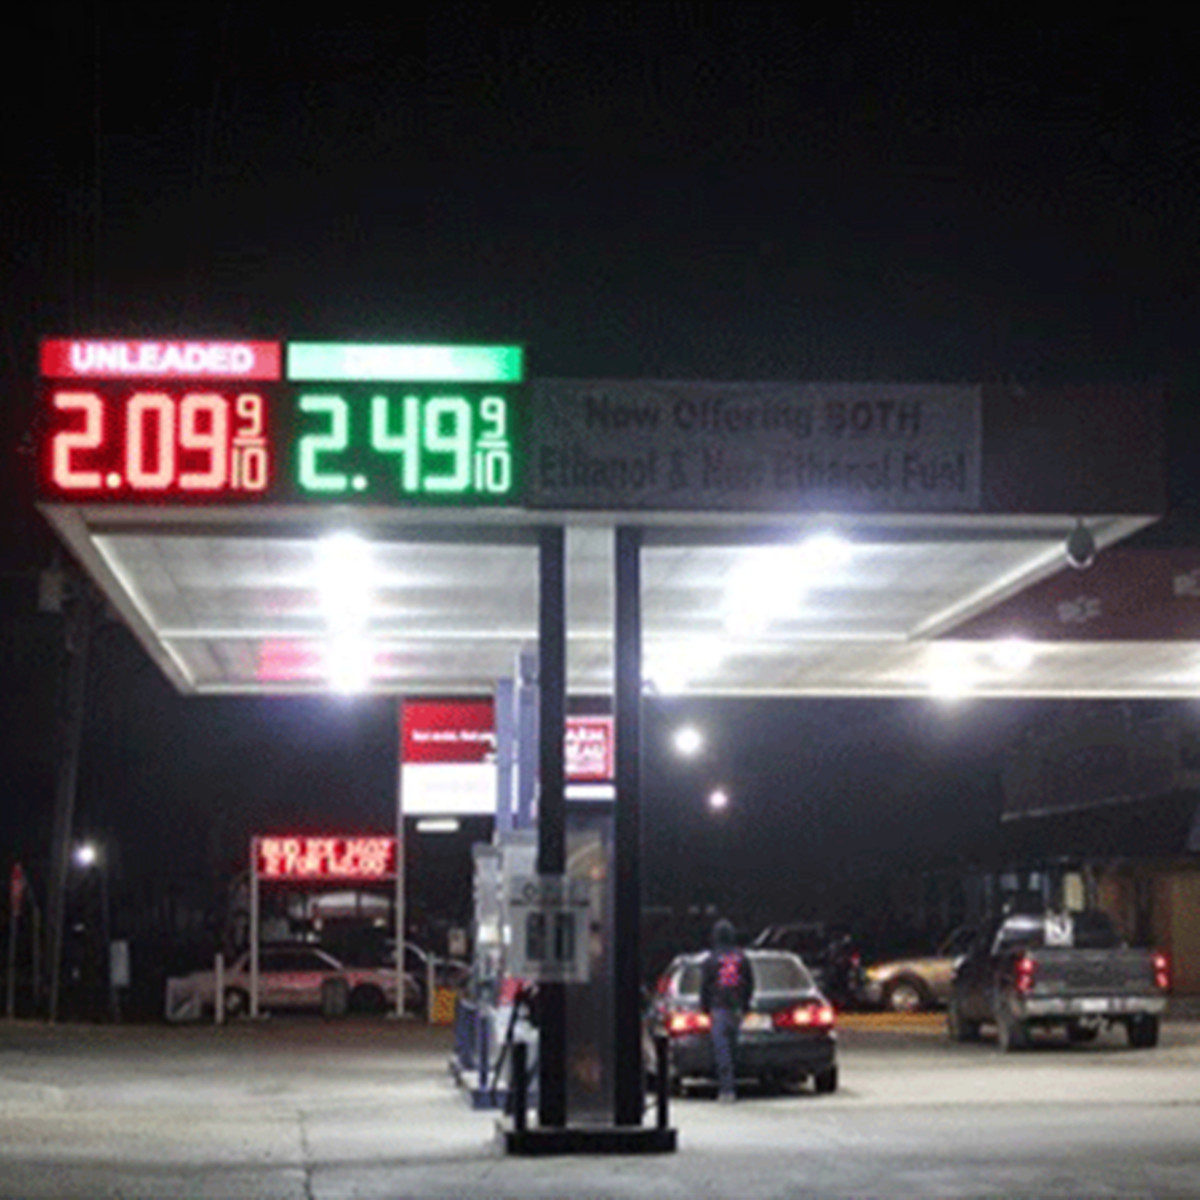 American Pure Gas Led Gas Station Signs